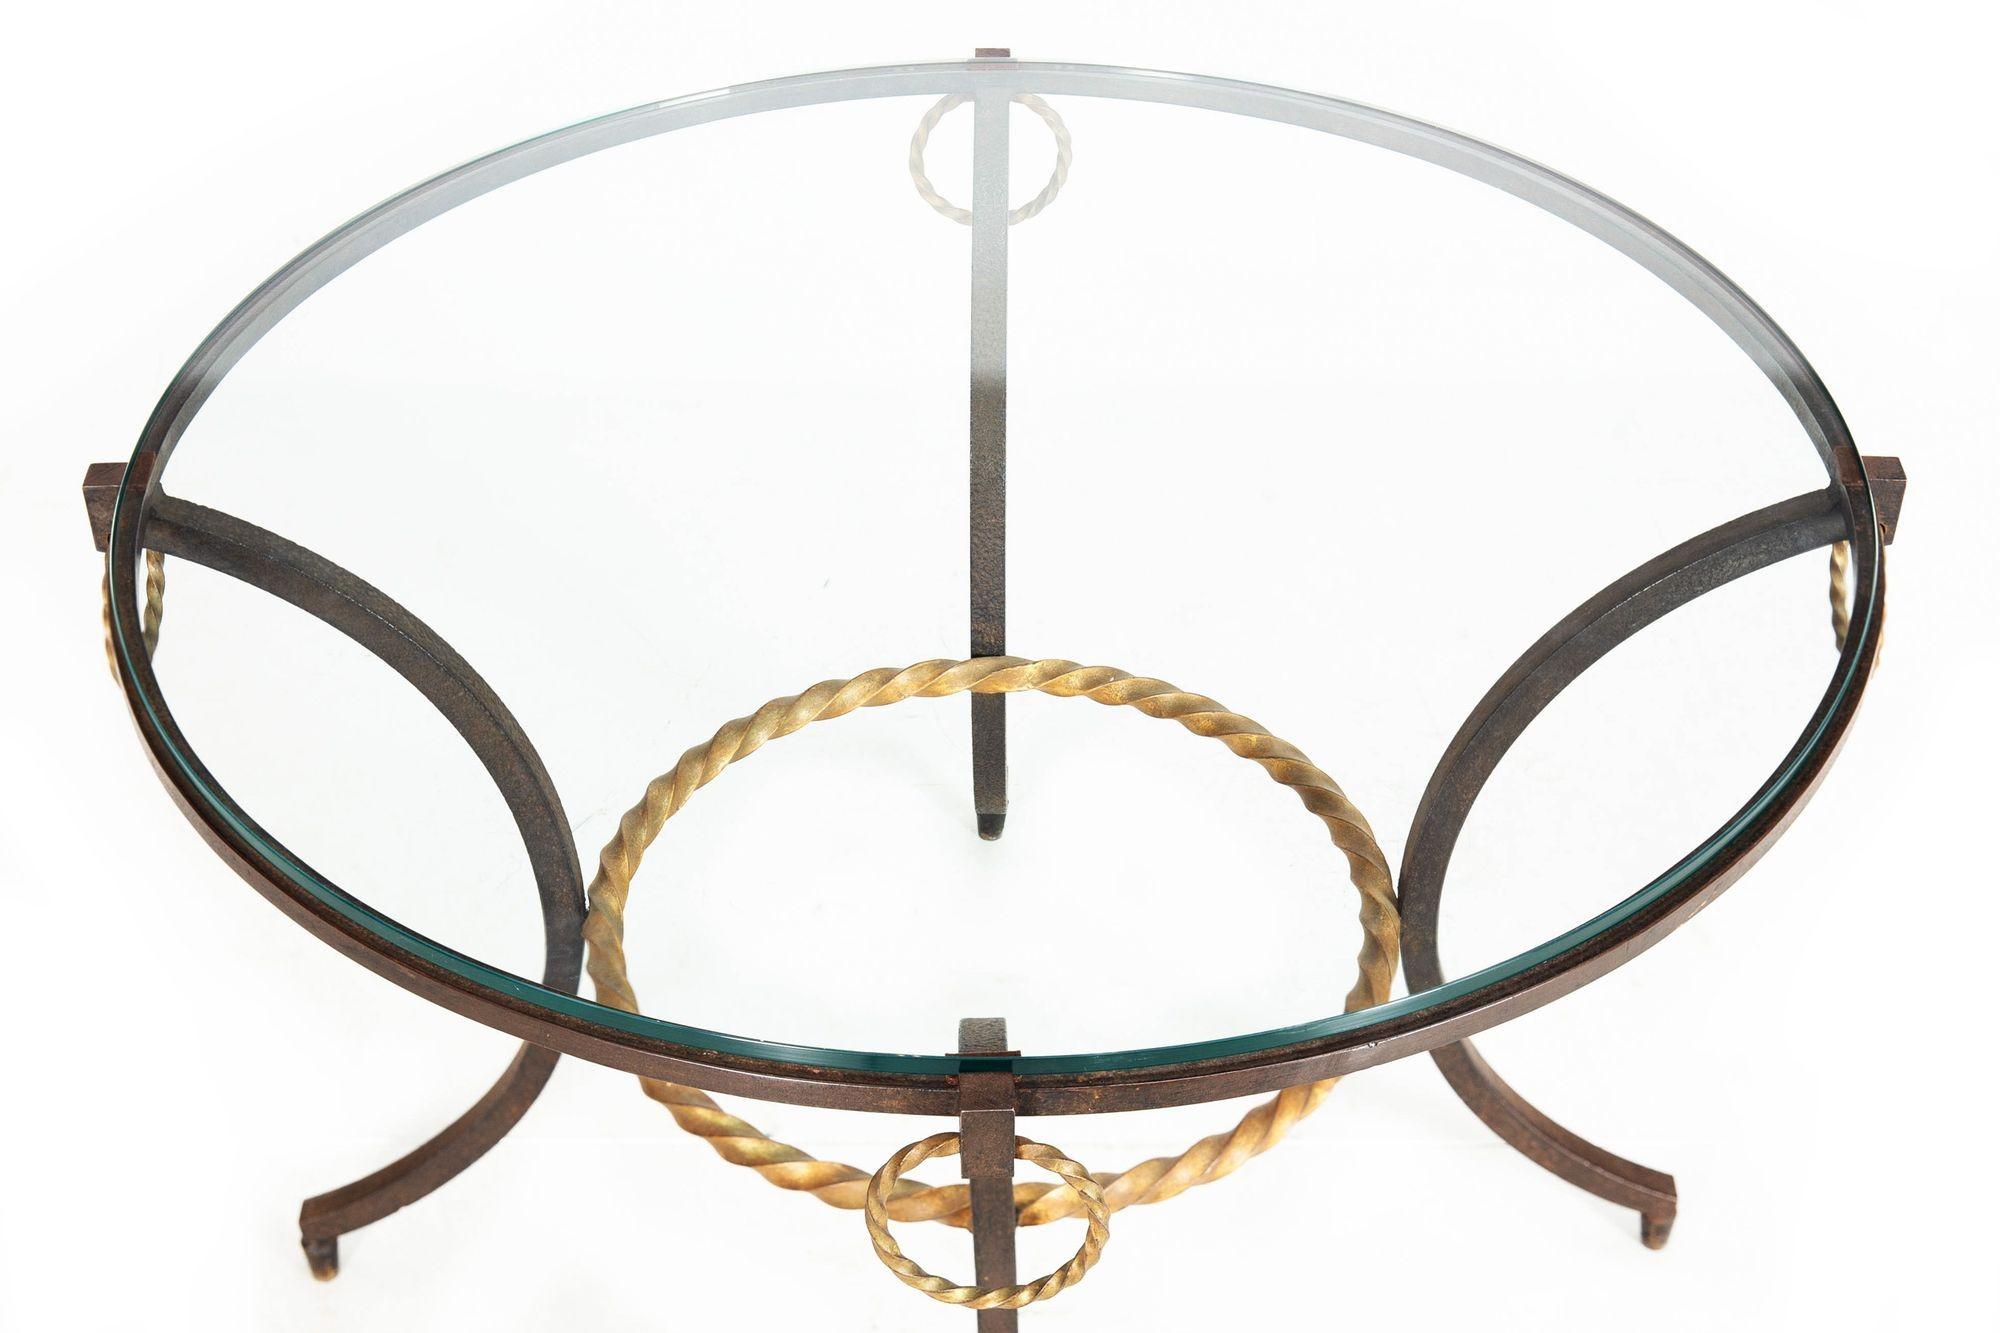 French Modernist Wrought-Iron & Glass Cocktail Side Coffee Table ca. 1950s For Sale 1